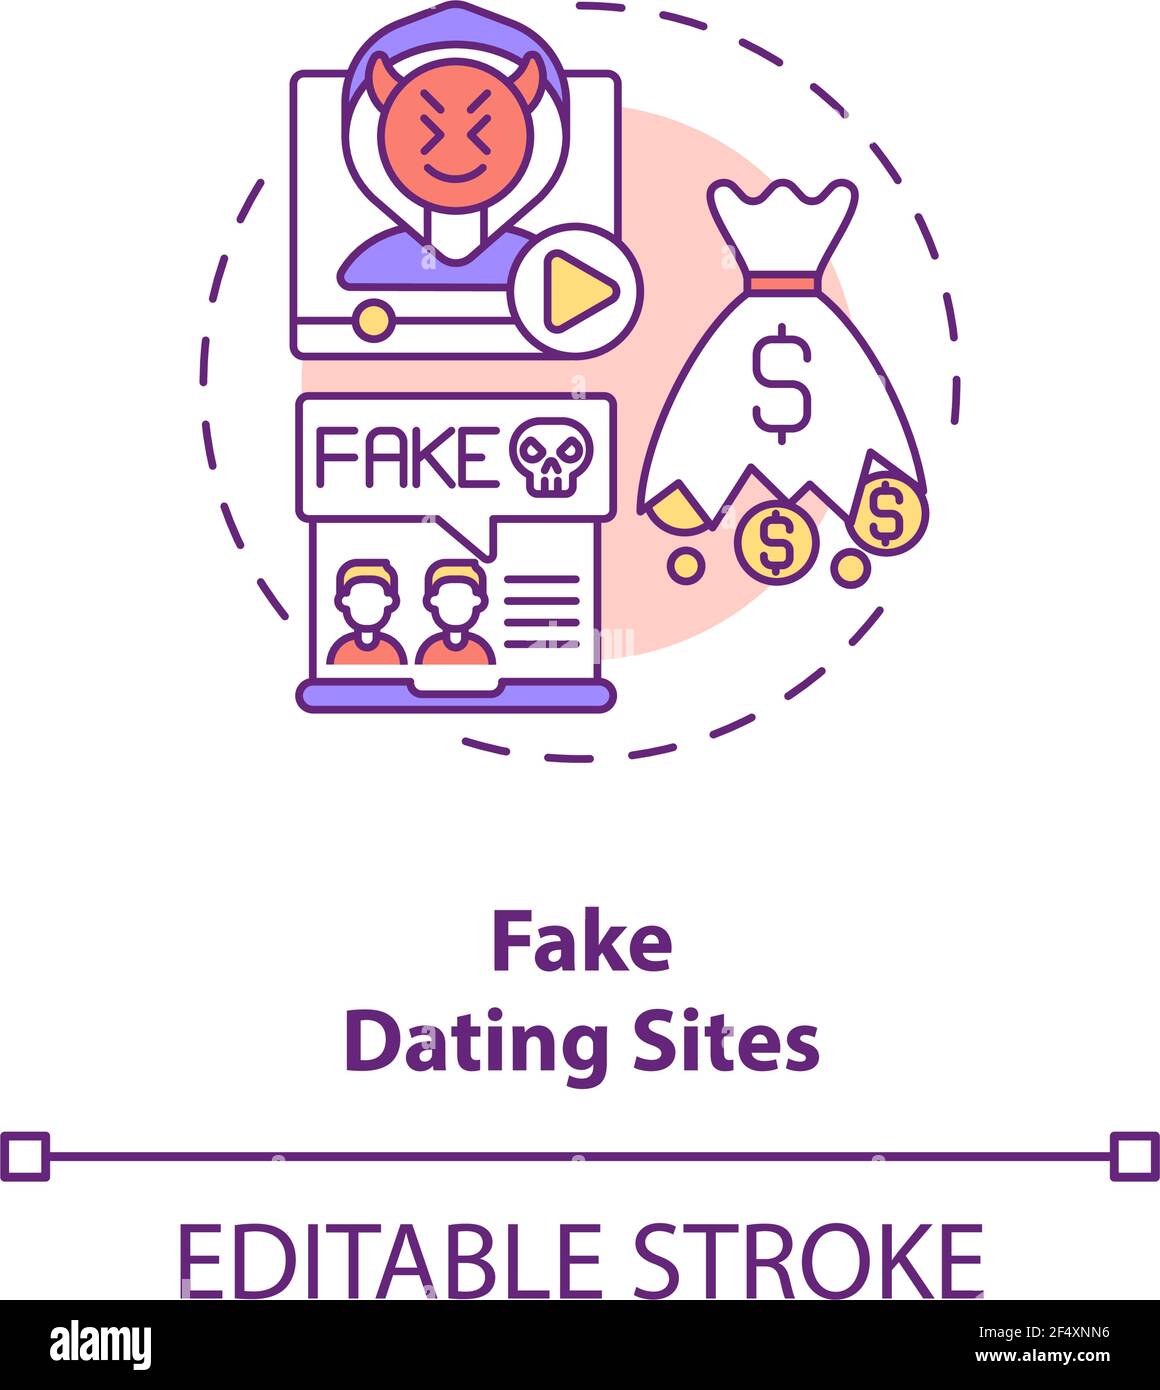 Fake dating website concept icon. Stock Vector